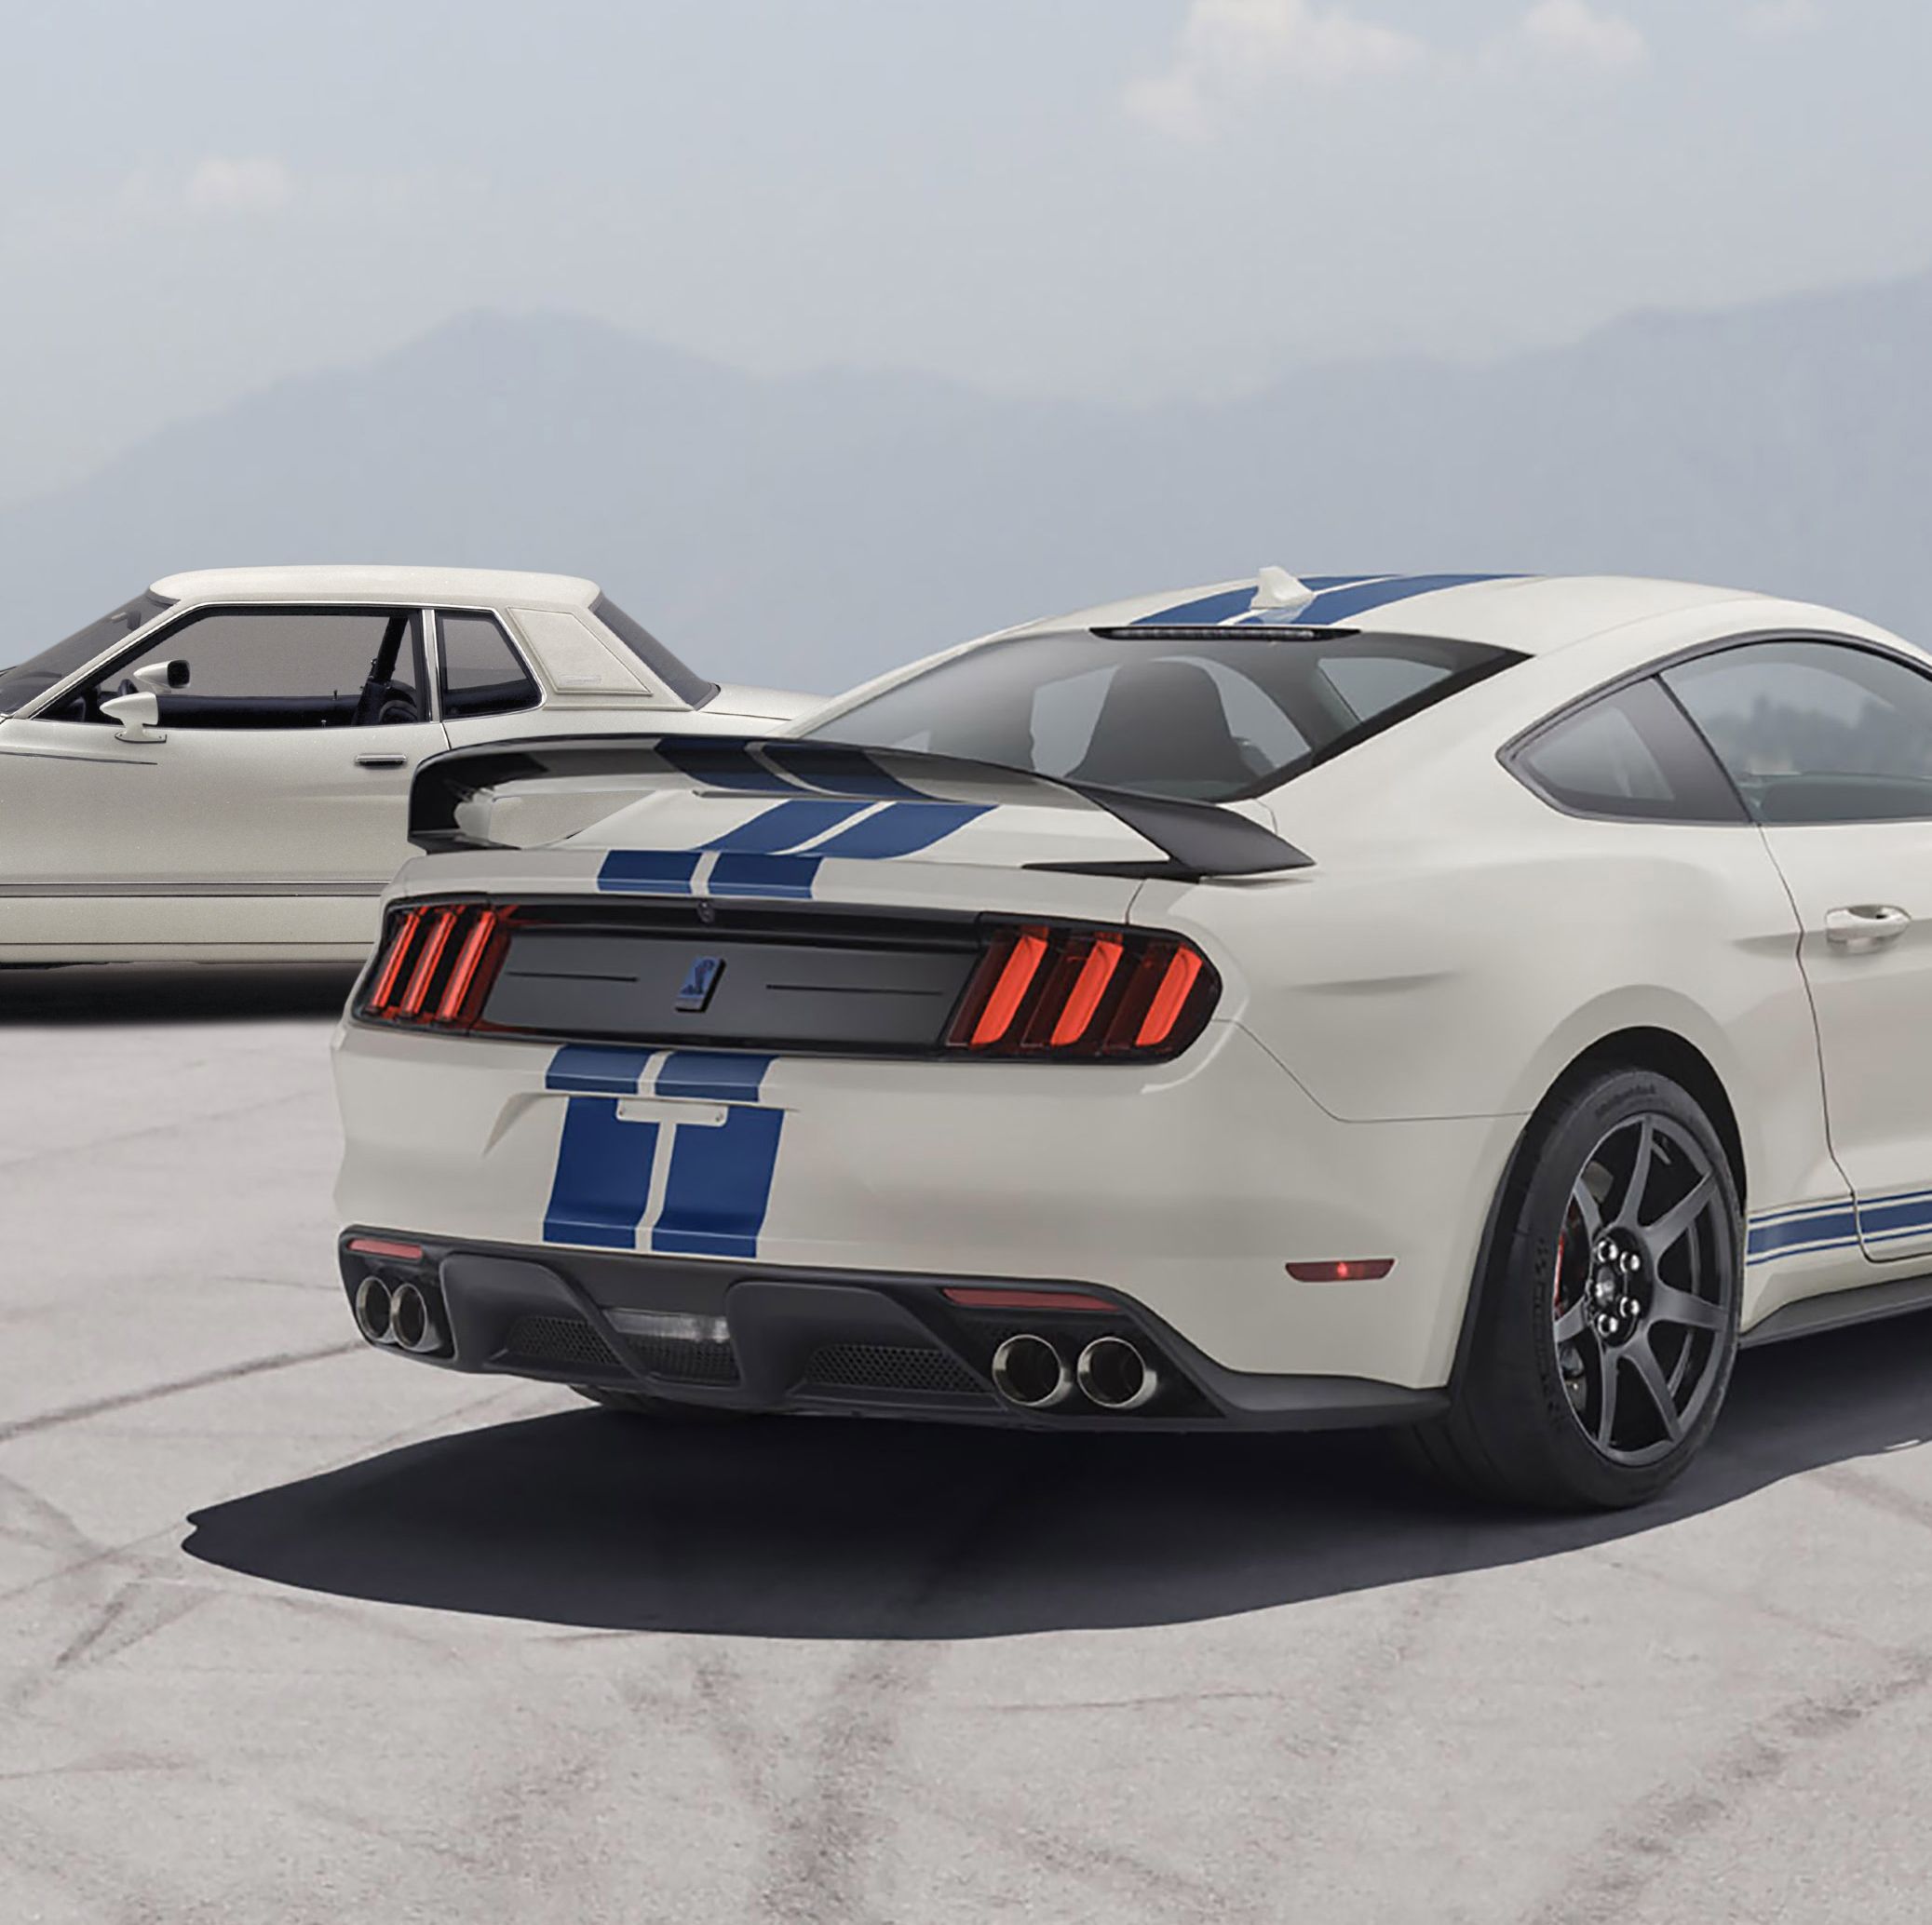 The Ford Mustang: History, Generations, Models, Specifications